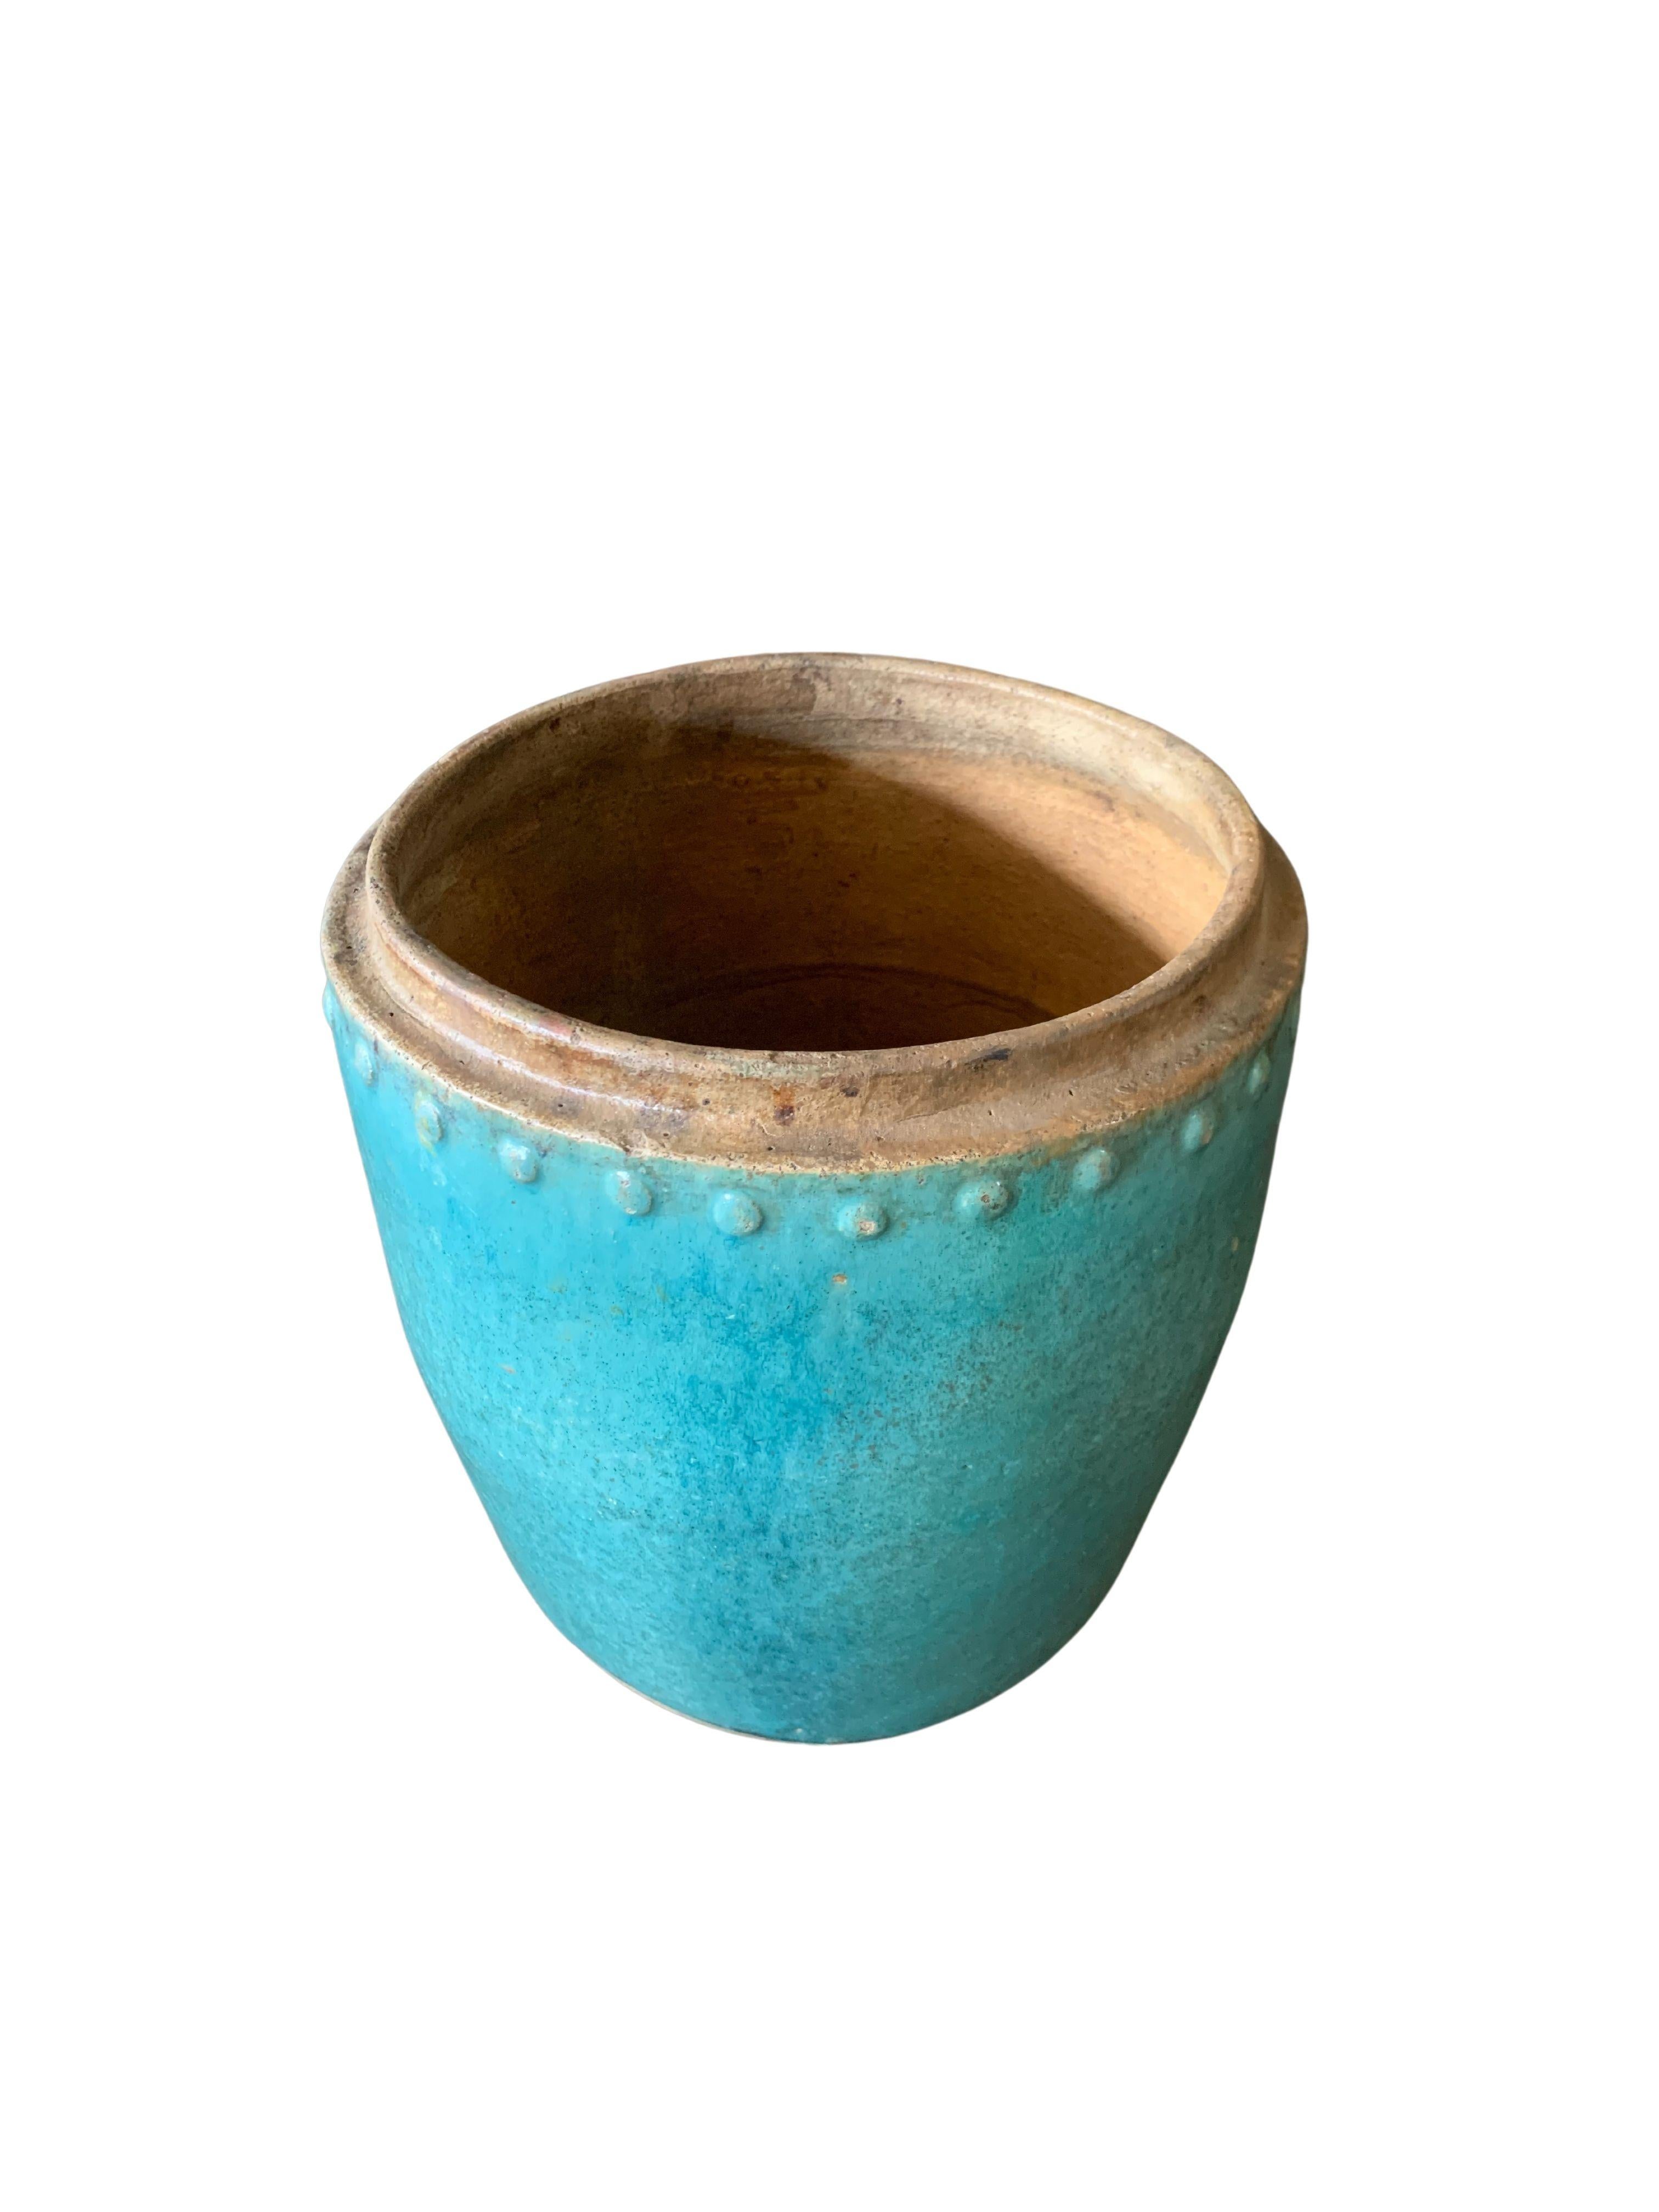 A wonderful blue-green glaze typical of Chinese 